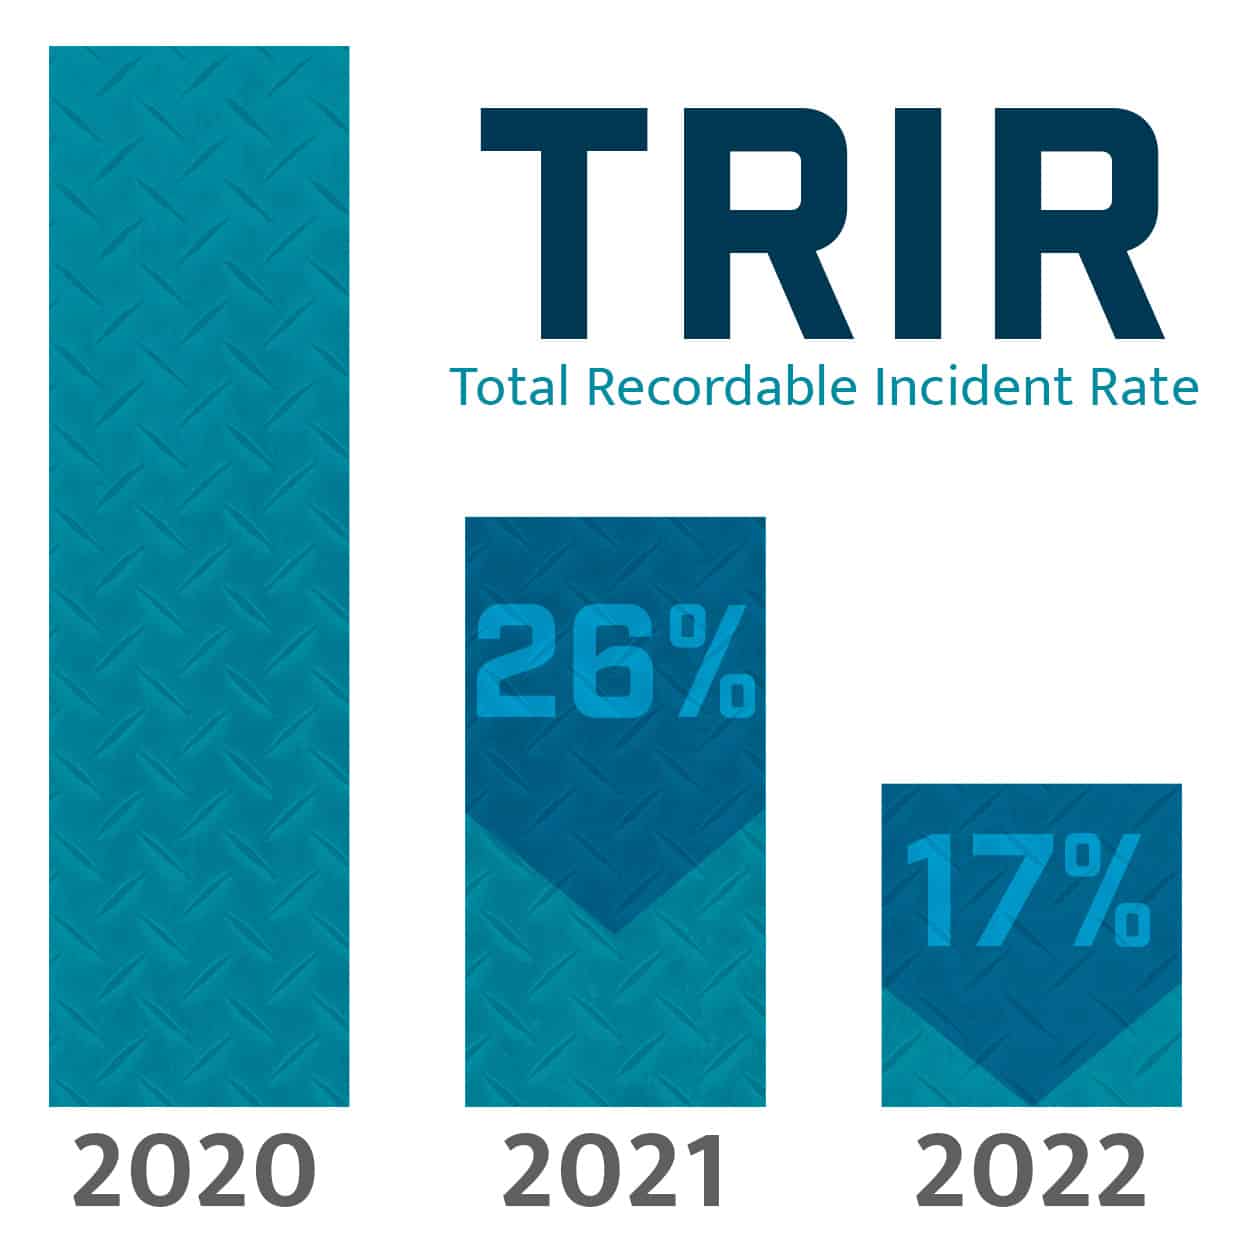 Total Recordable Incident Rate graph of the last 3 years